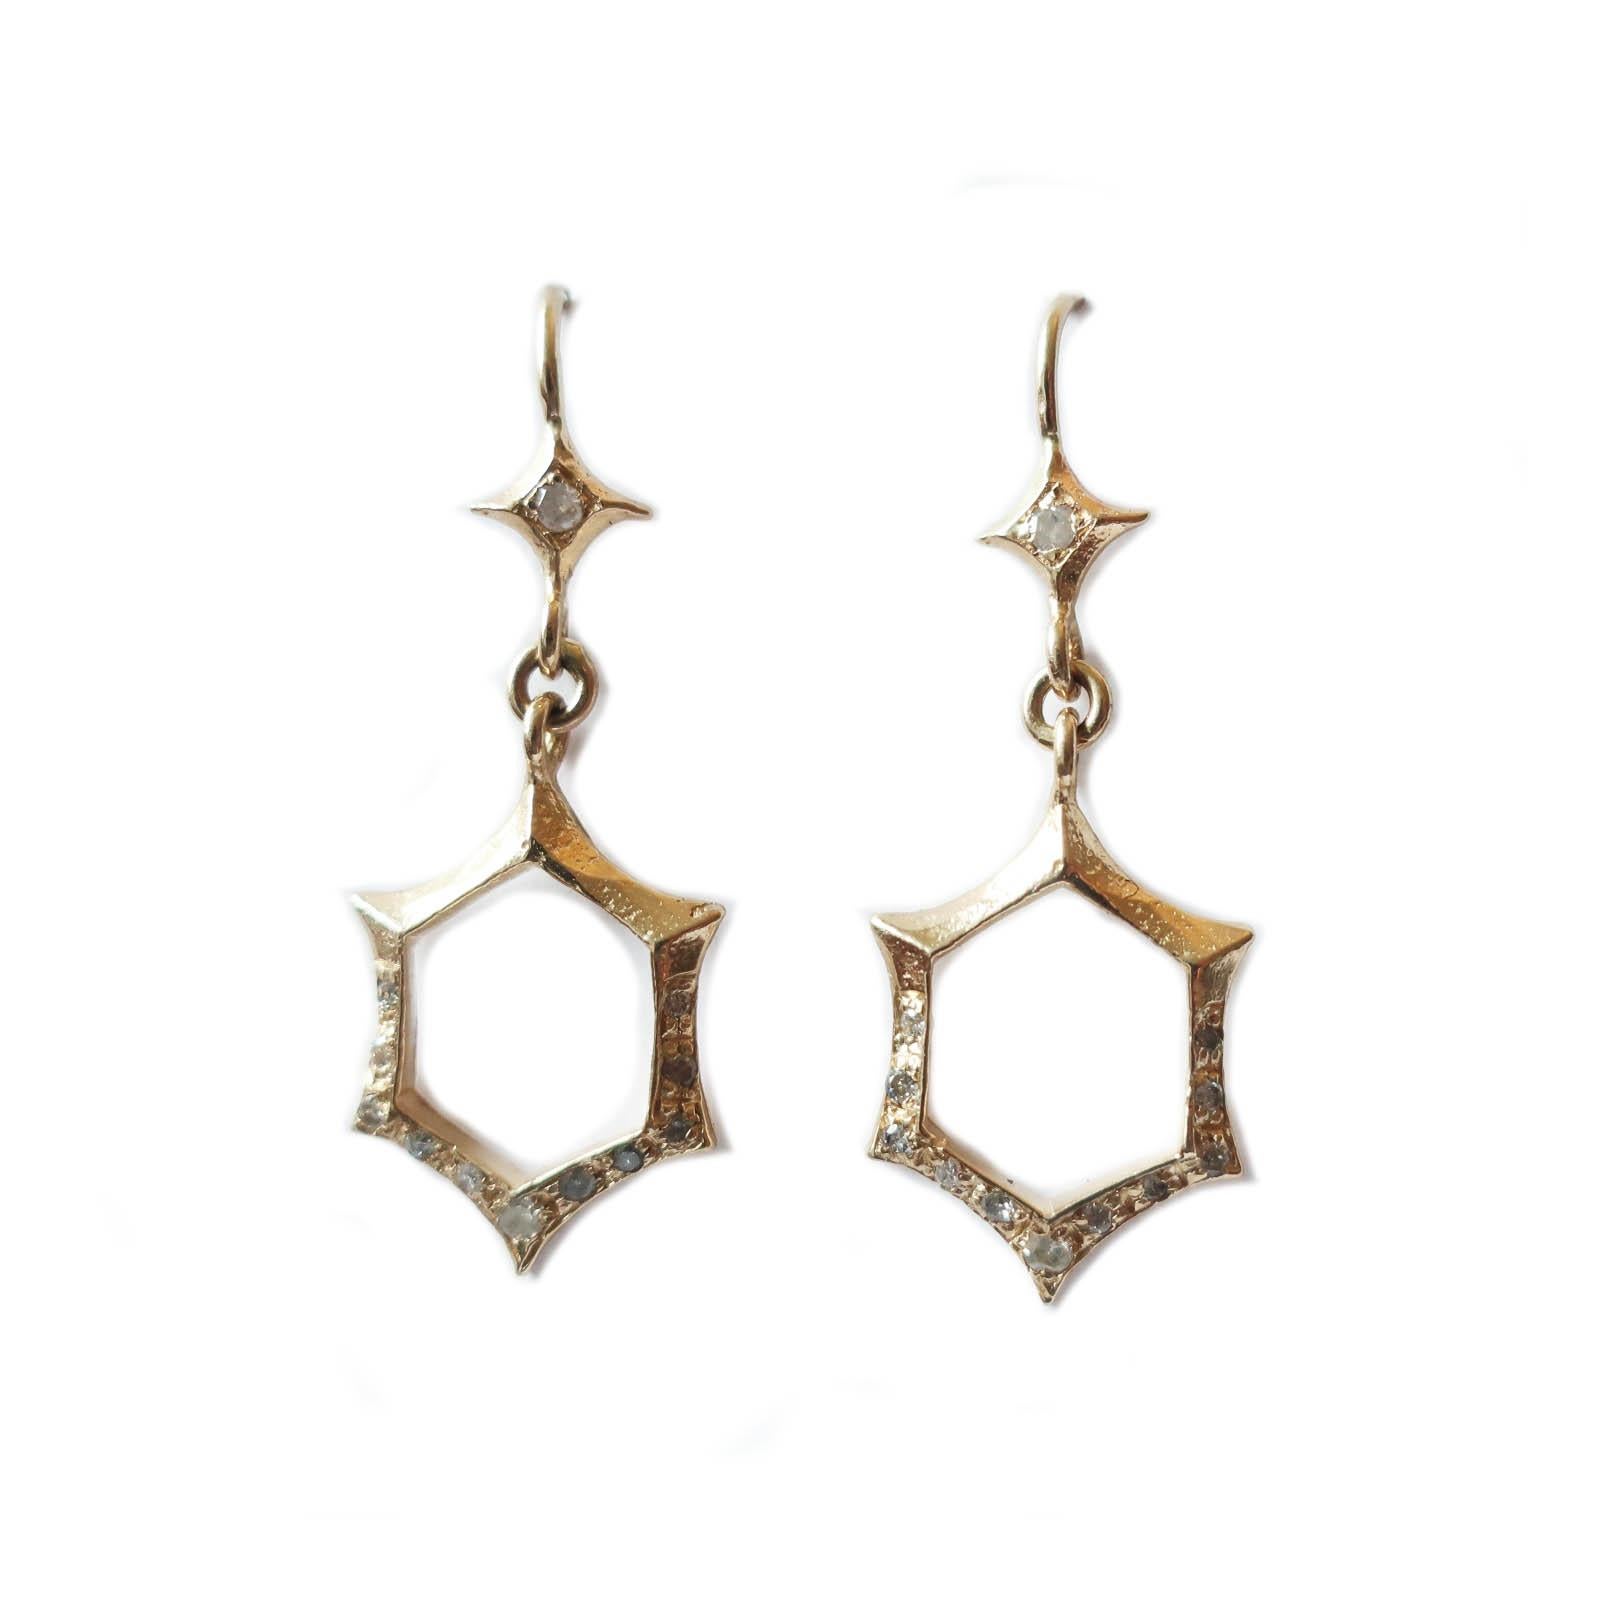 Gorgeous hand crafted solid 14K gold earrings with diamonds. These feature a star with a 2mm bead set icy diamond and 14k gold ear hook on the top. The bottom hexagon shape features 1mm pave diamonds. These are lightweight art deco inspired